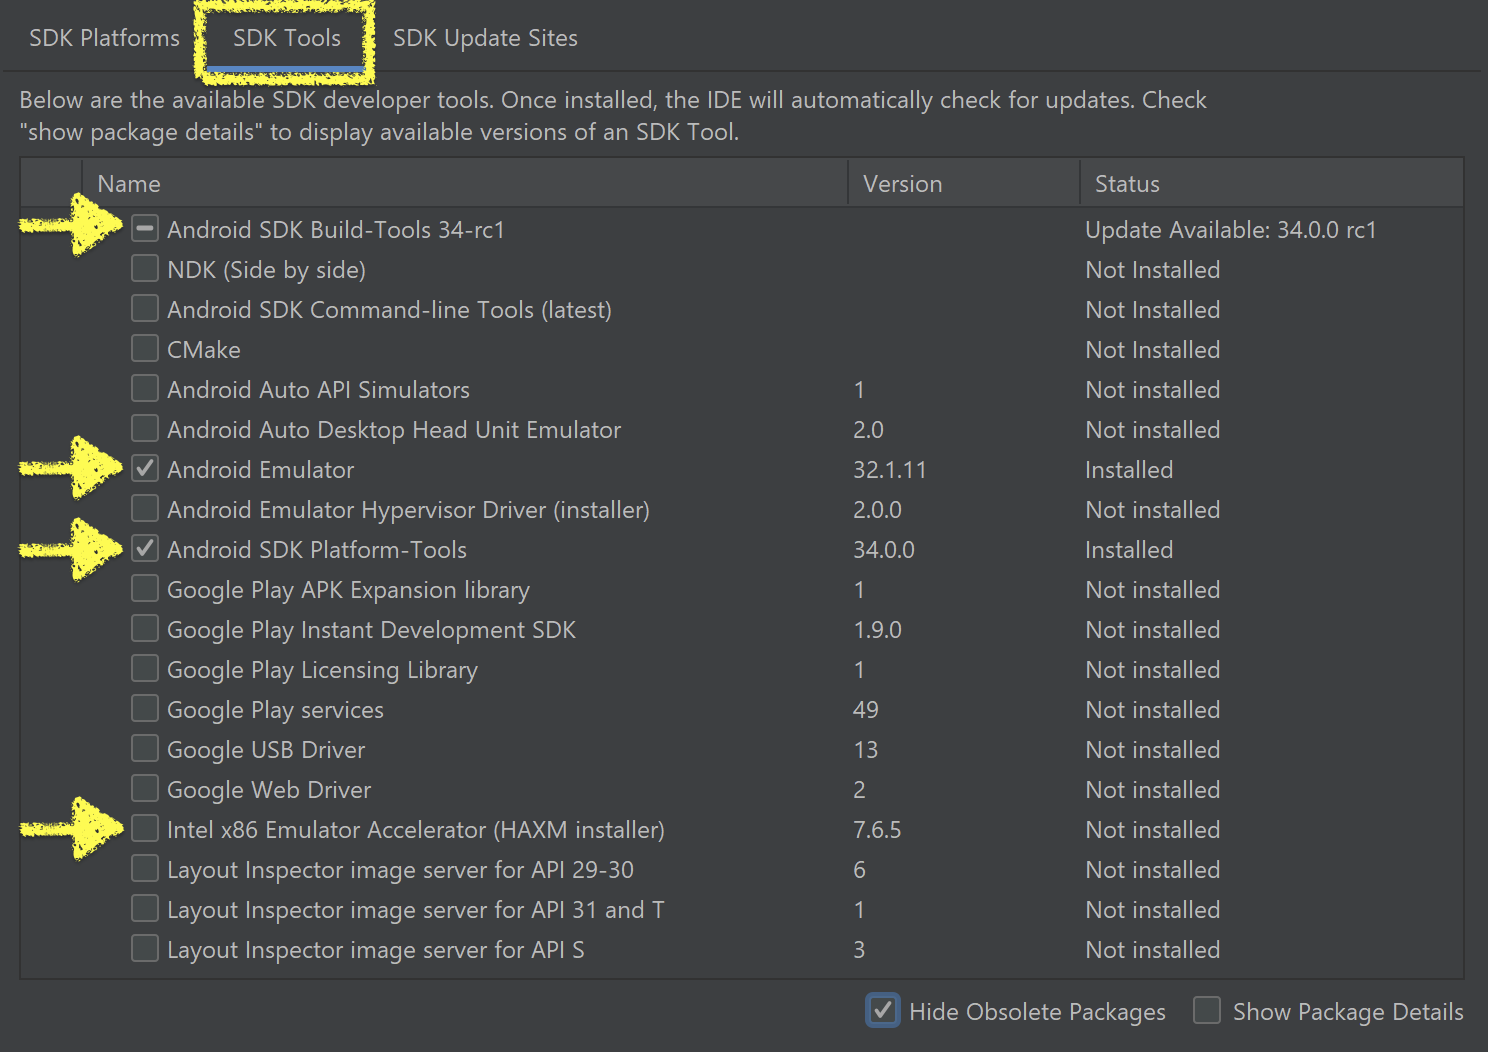 Install Additional Android SDK Tools - Components to be installed